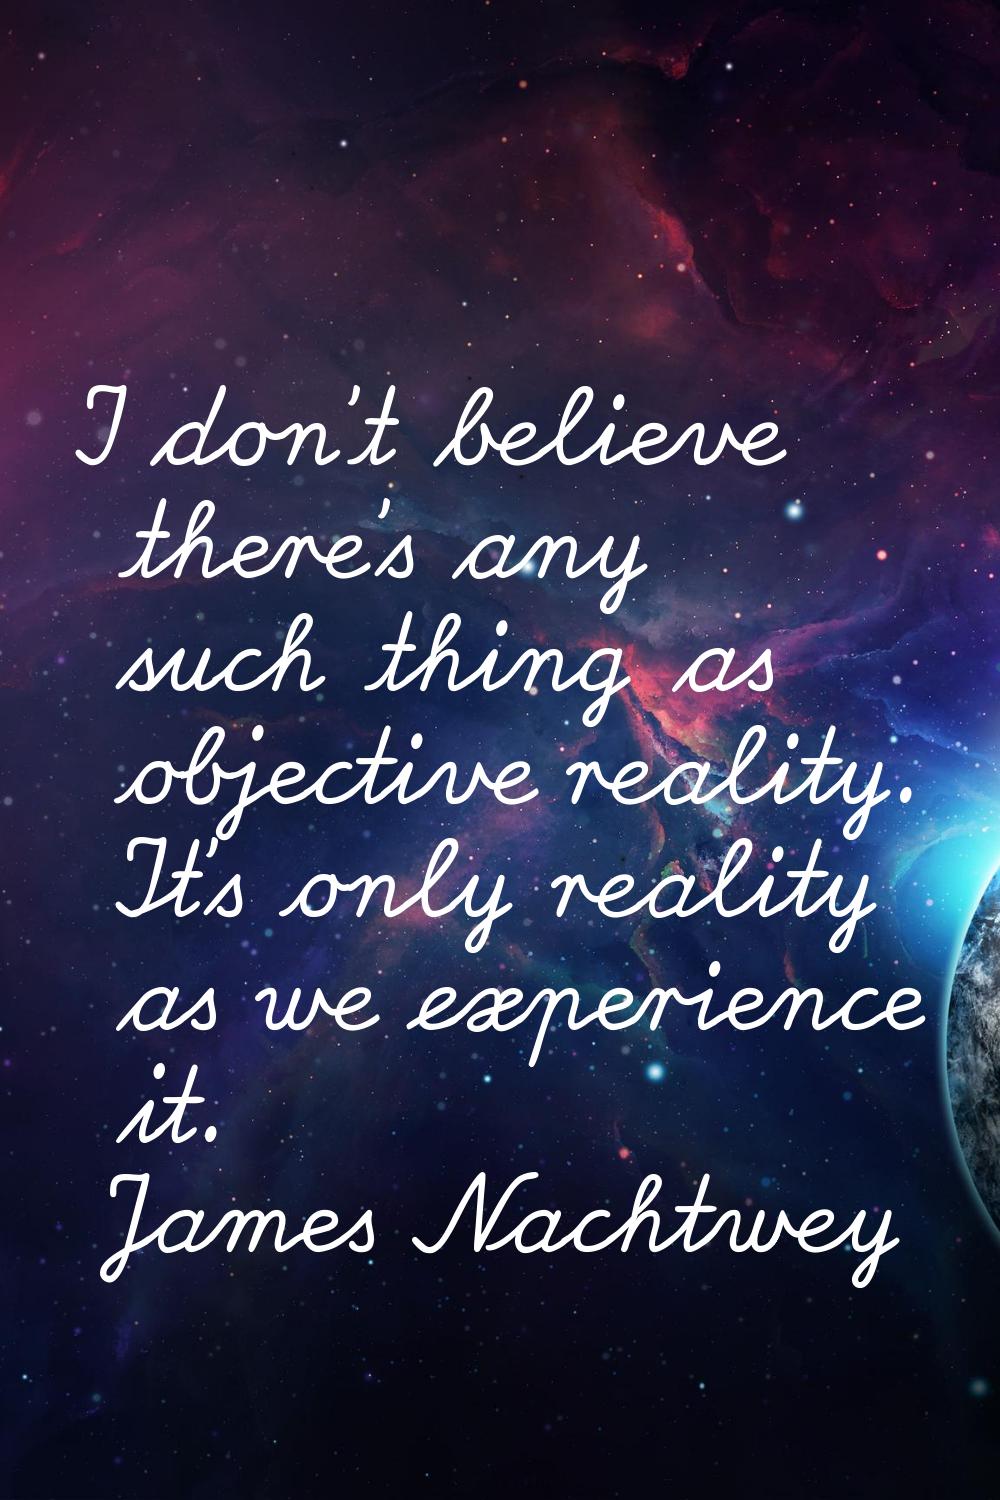 I don't believe there's any such thing as objective reality. It's only reality as we experience it.